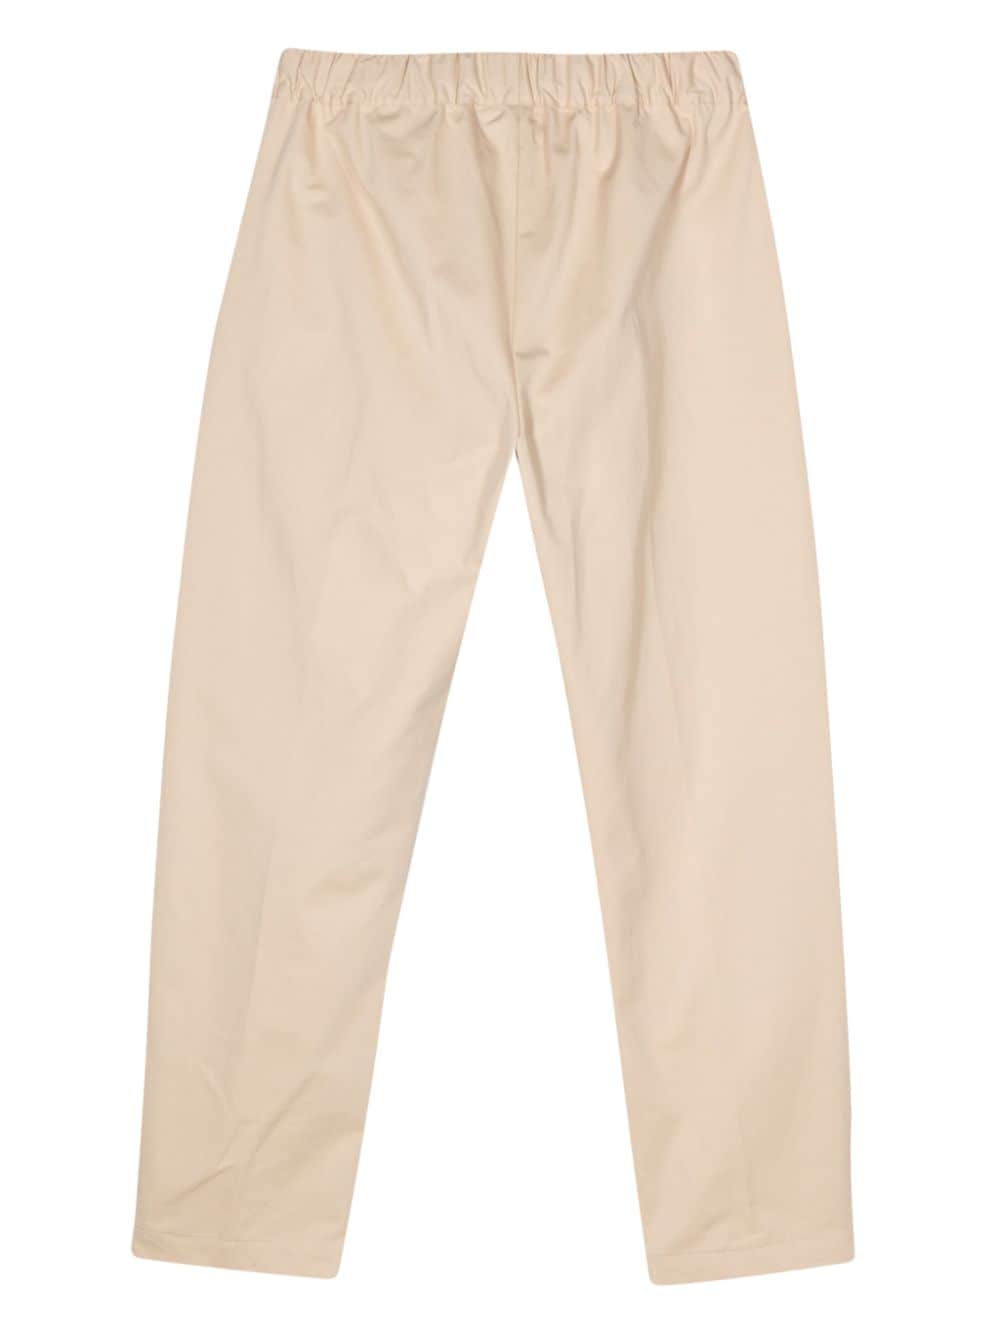 Semicouture elasticated-waistband cotton trousers - Beige